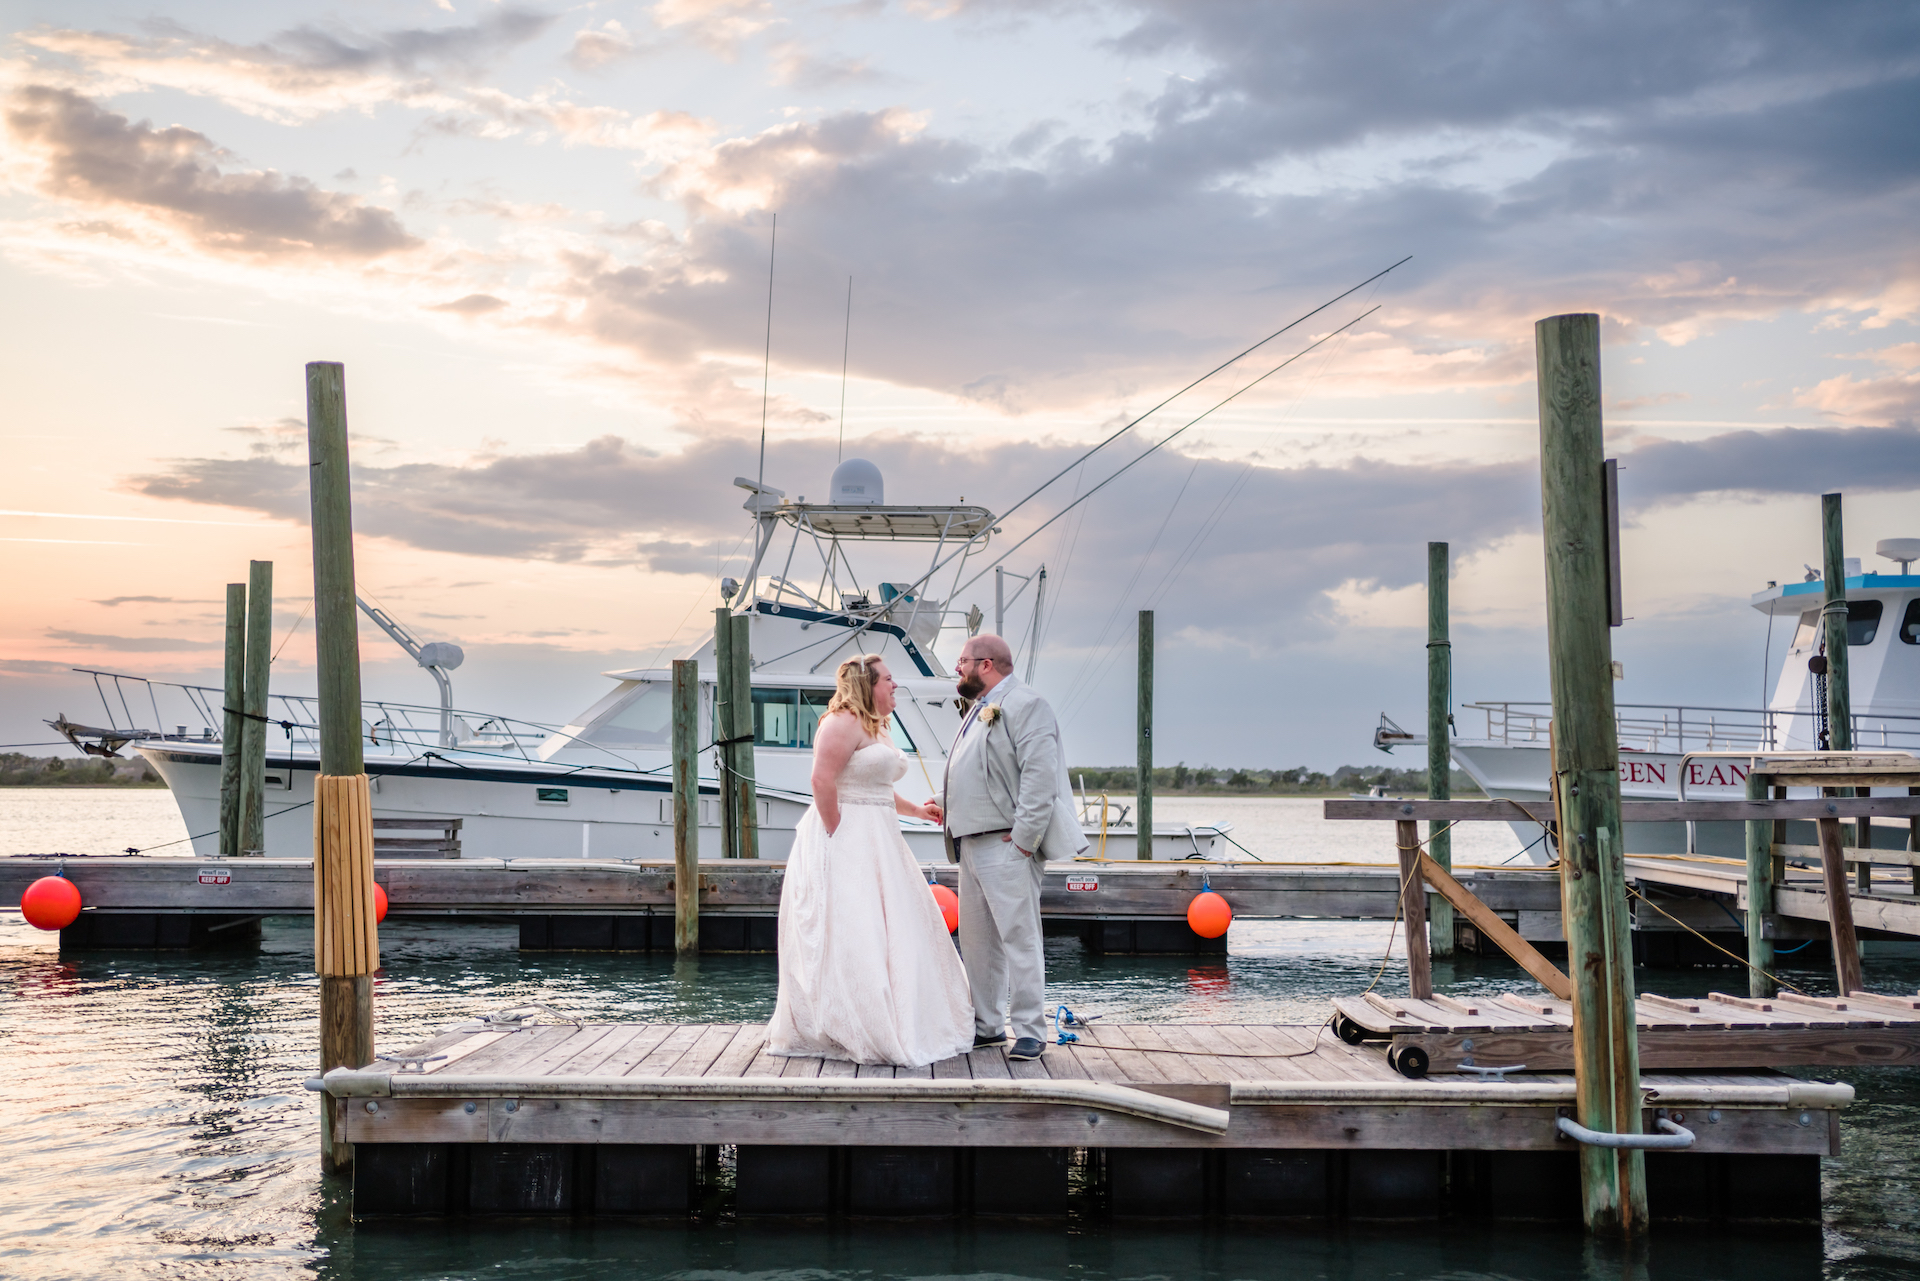 Topsail Island Events | Wedding Venue | Event Venue | The Historic Assembly Building on Topsail Island NC